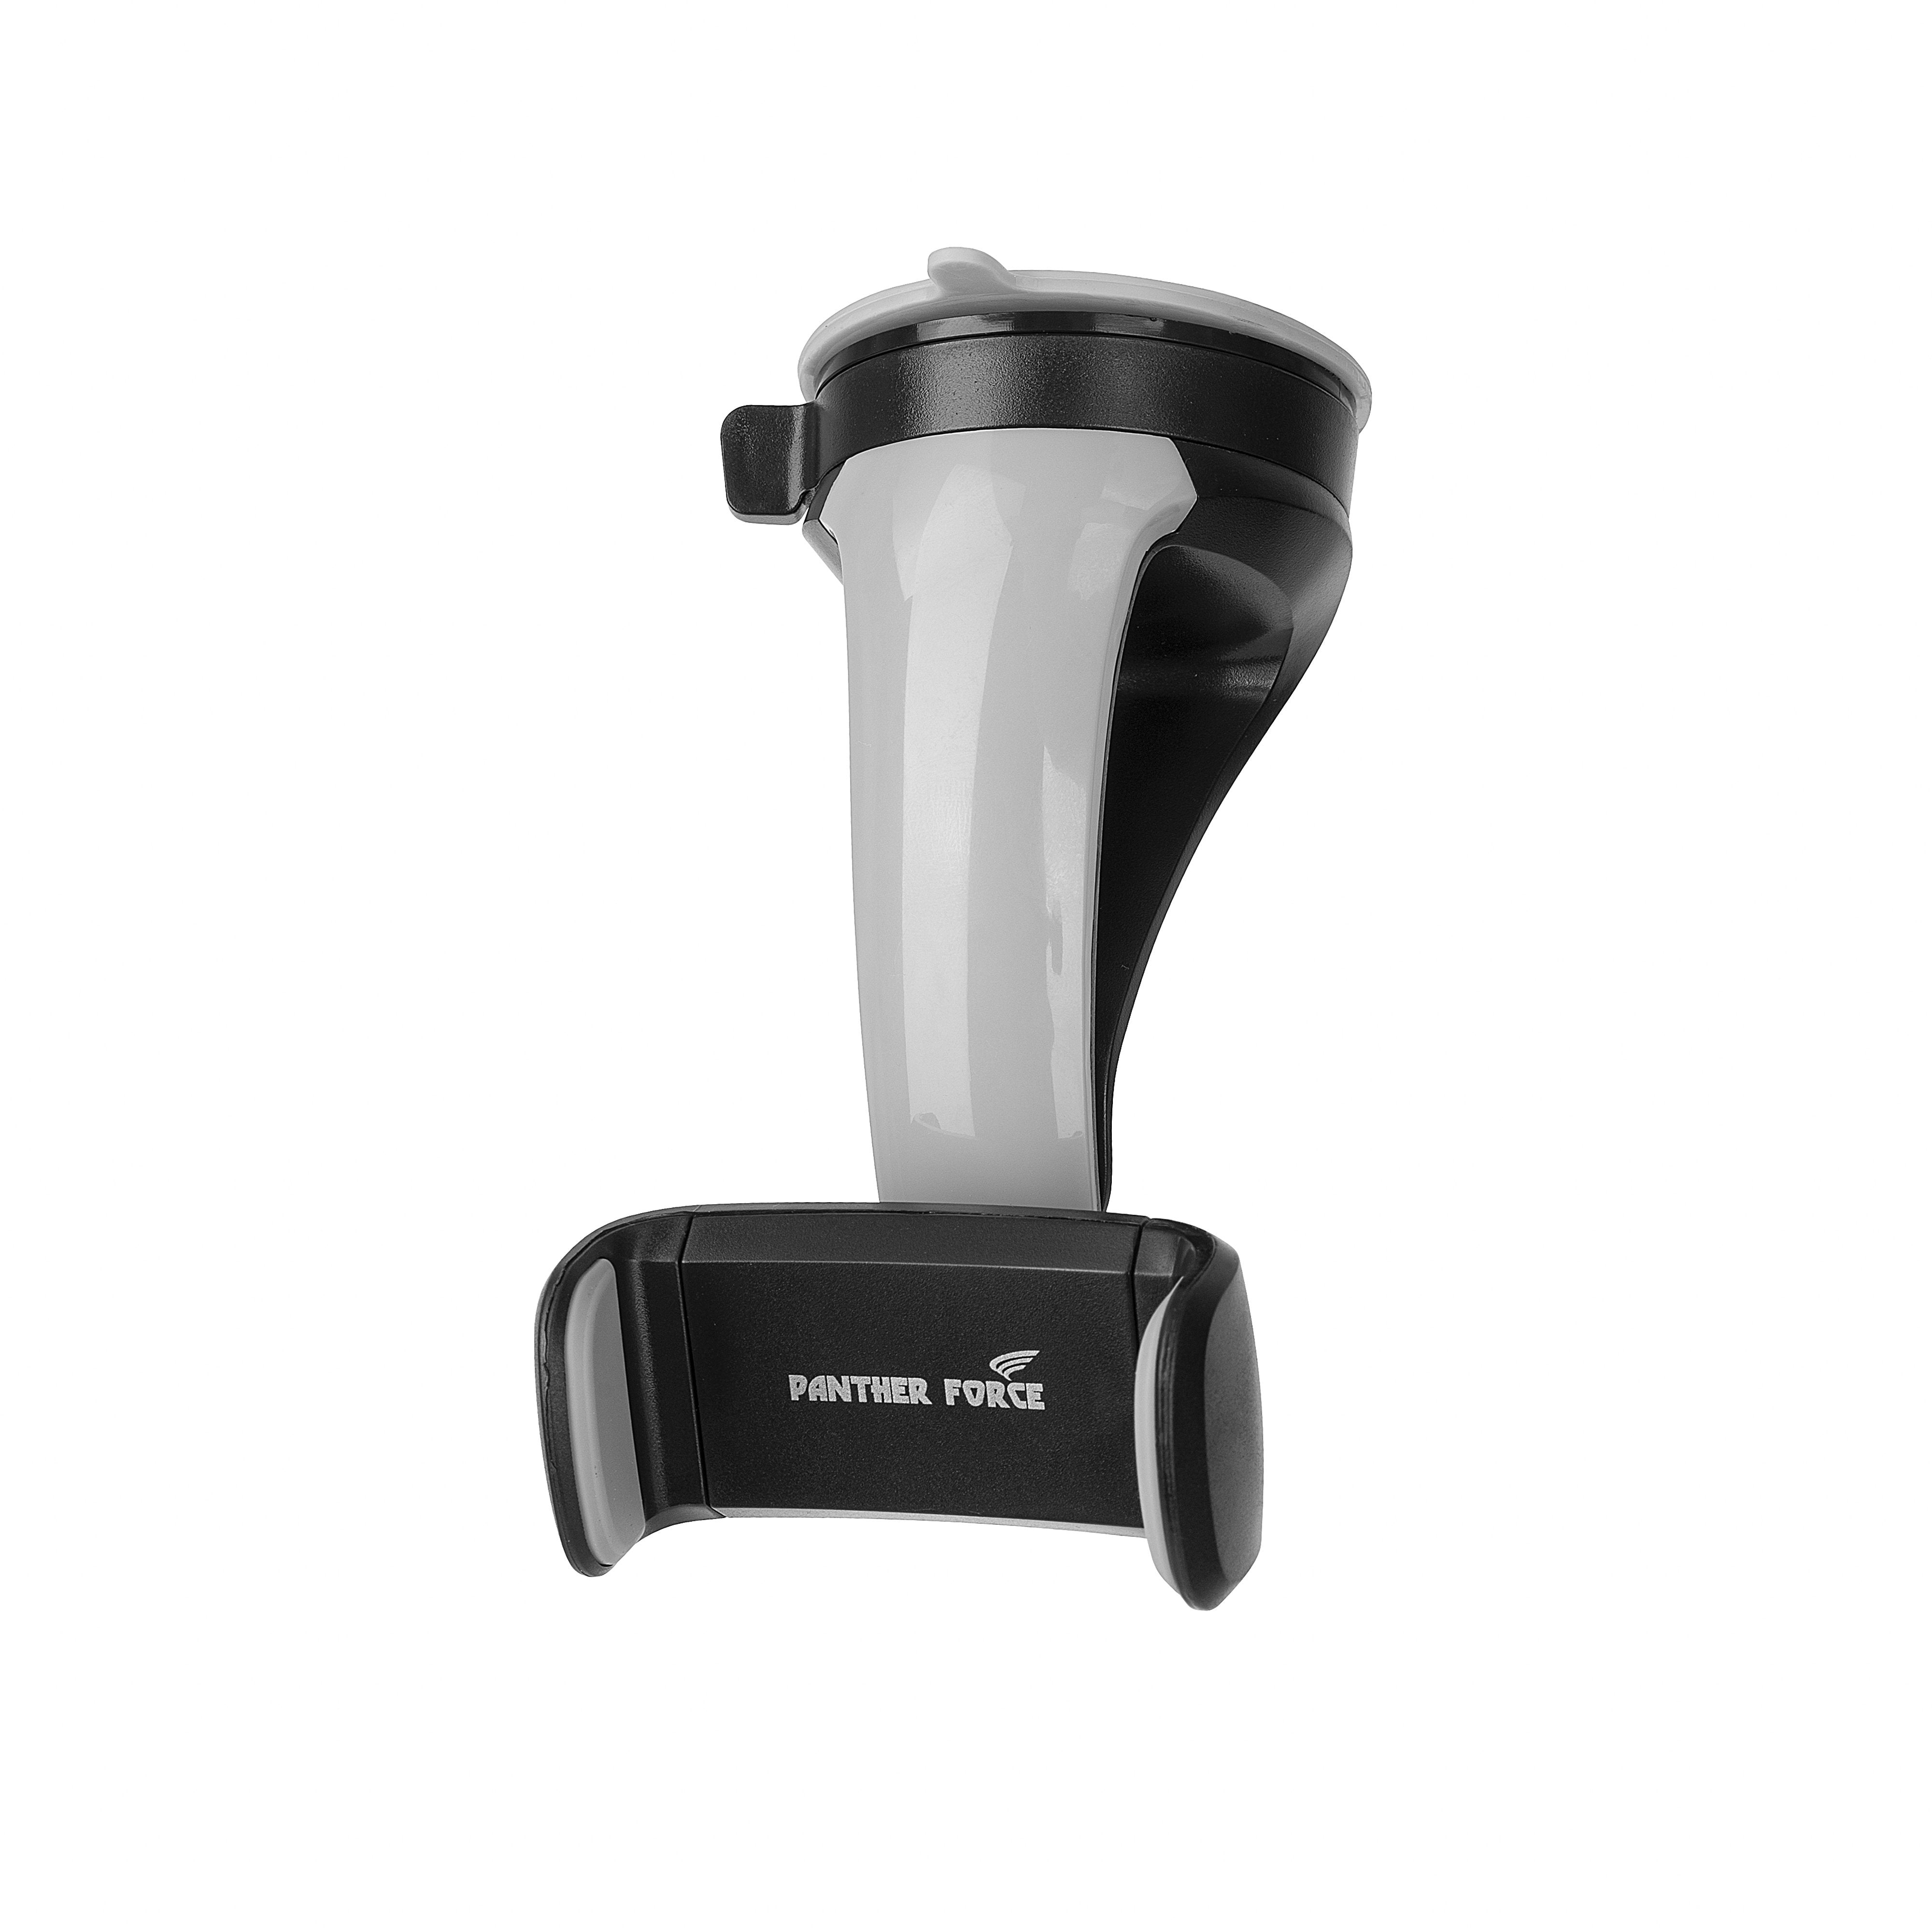 WINDSCREEN SUCTION 360 ROTATABLE PHONE HOLDER